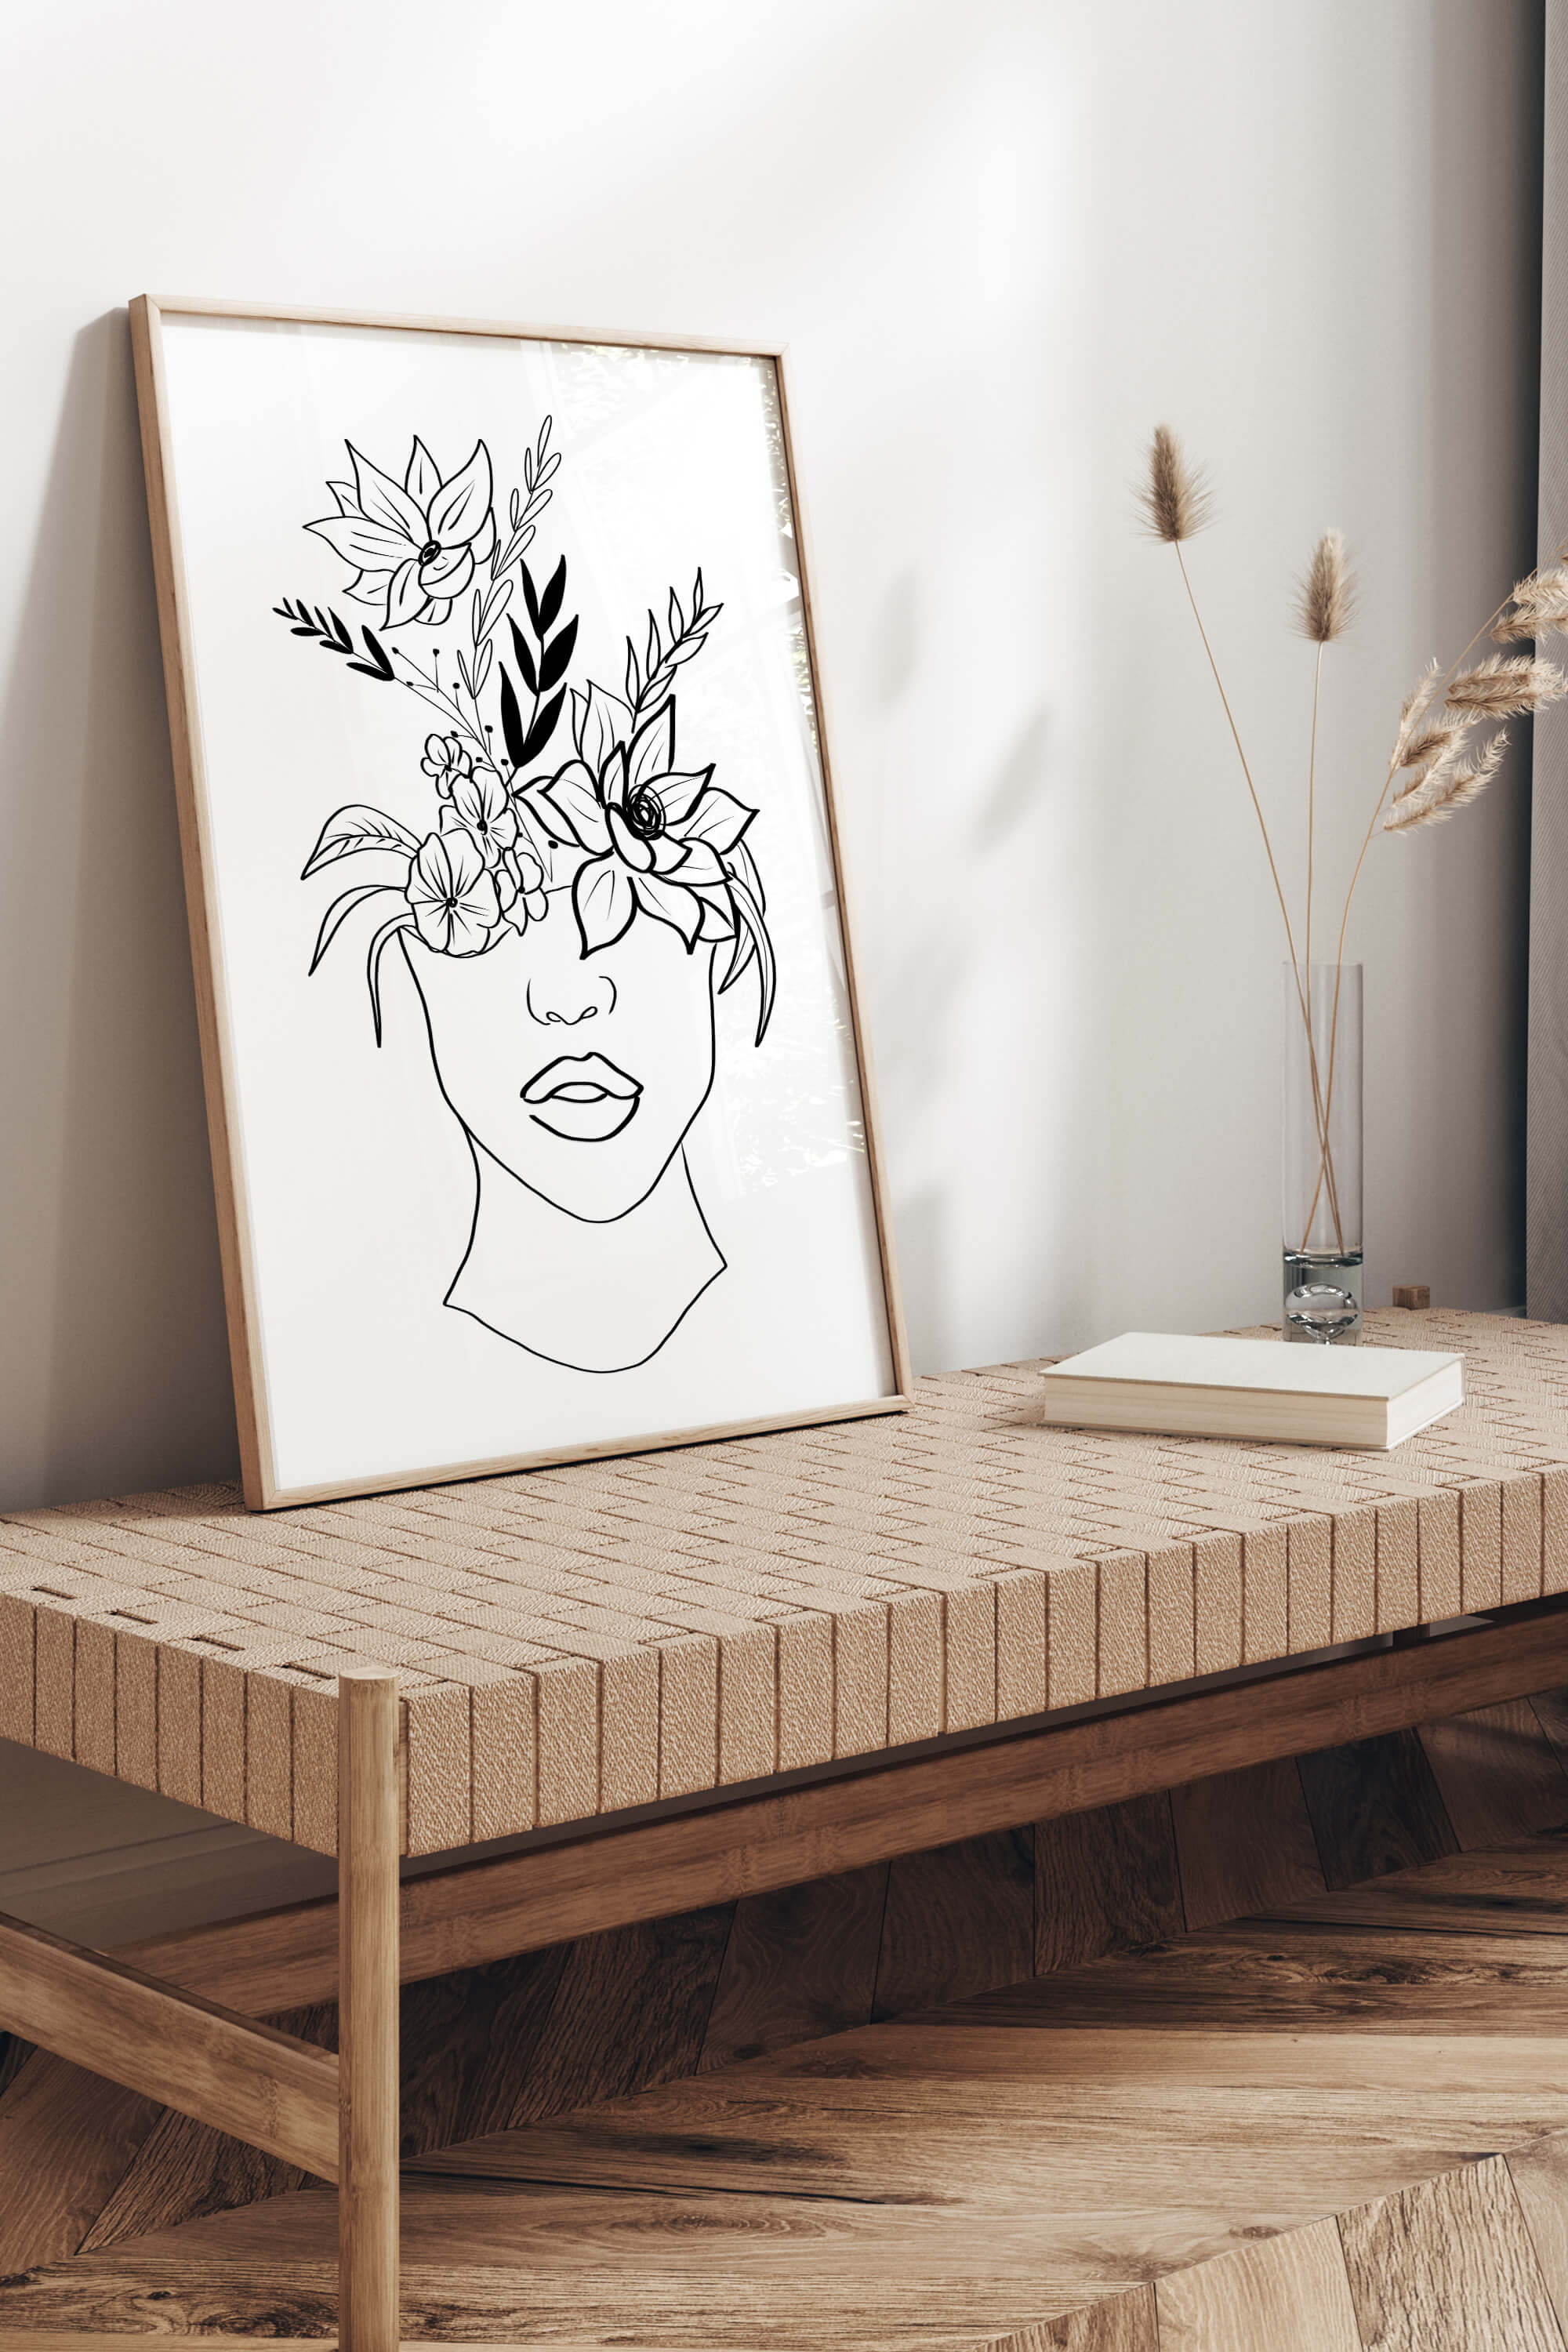 Nature-inspired wall decor with a feminine touch. A captivating black and white art print celebrating the harmony of nature, style, and feminine power.